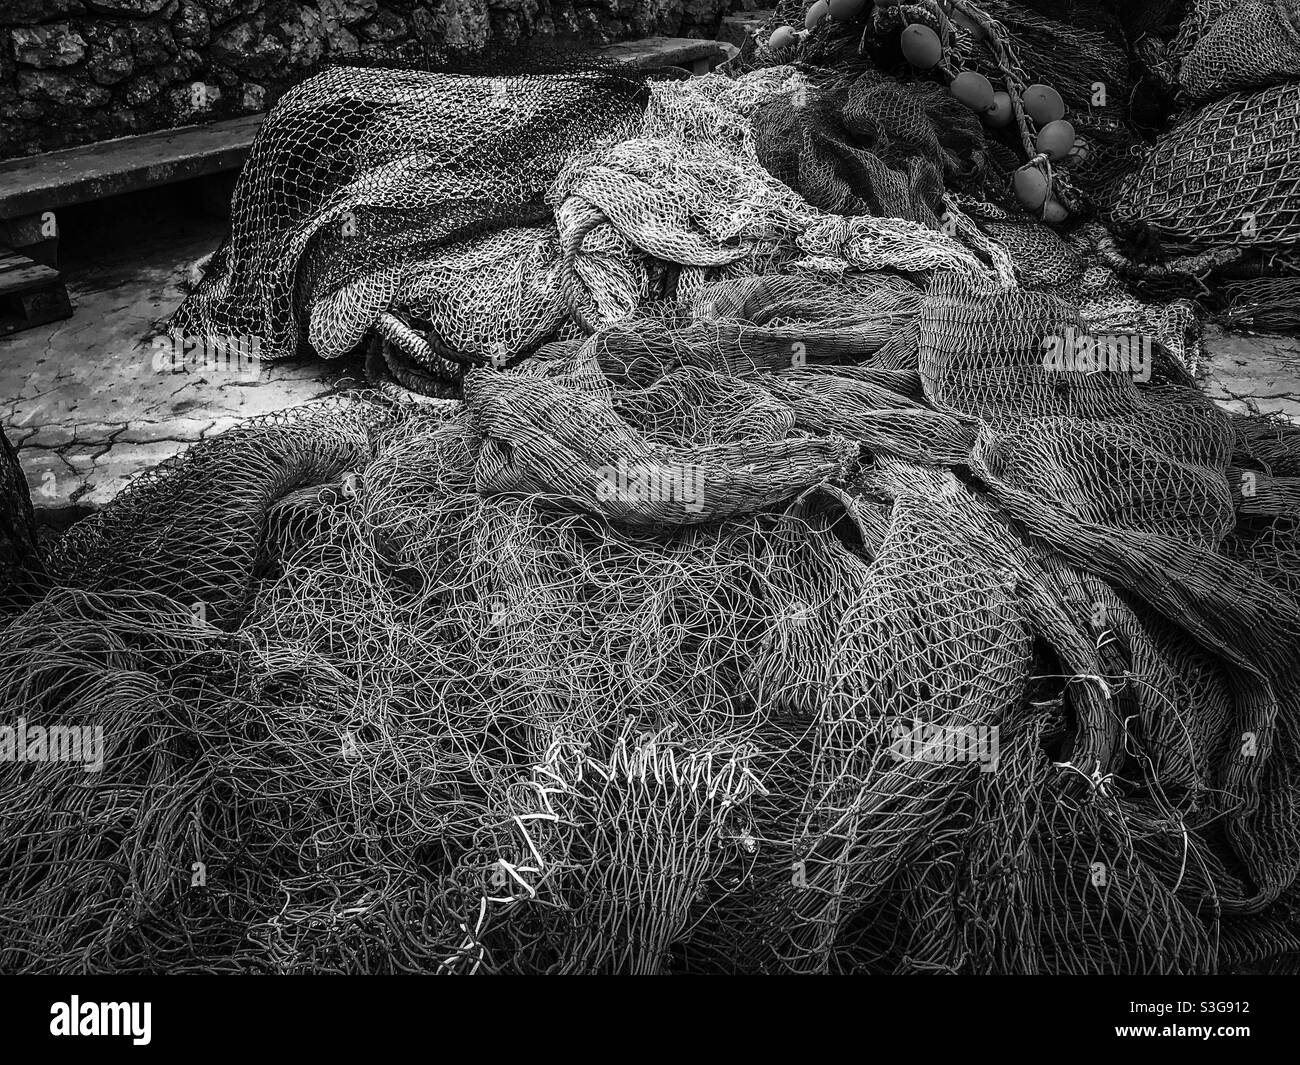 Nets to catch fish Black and White Stock Photos & Images - Alamy